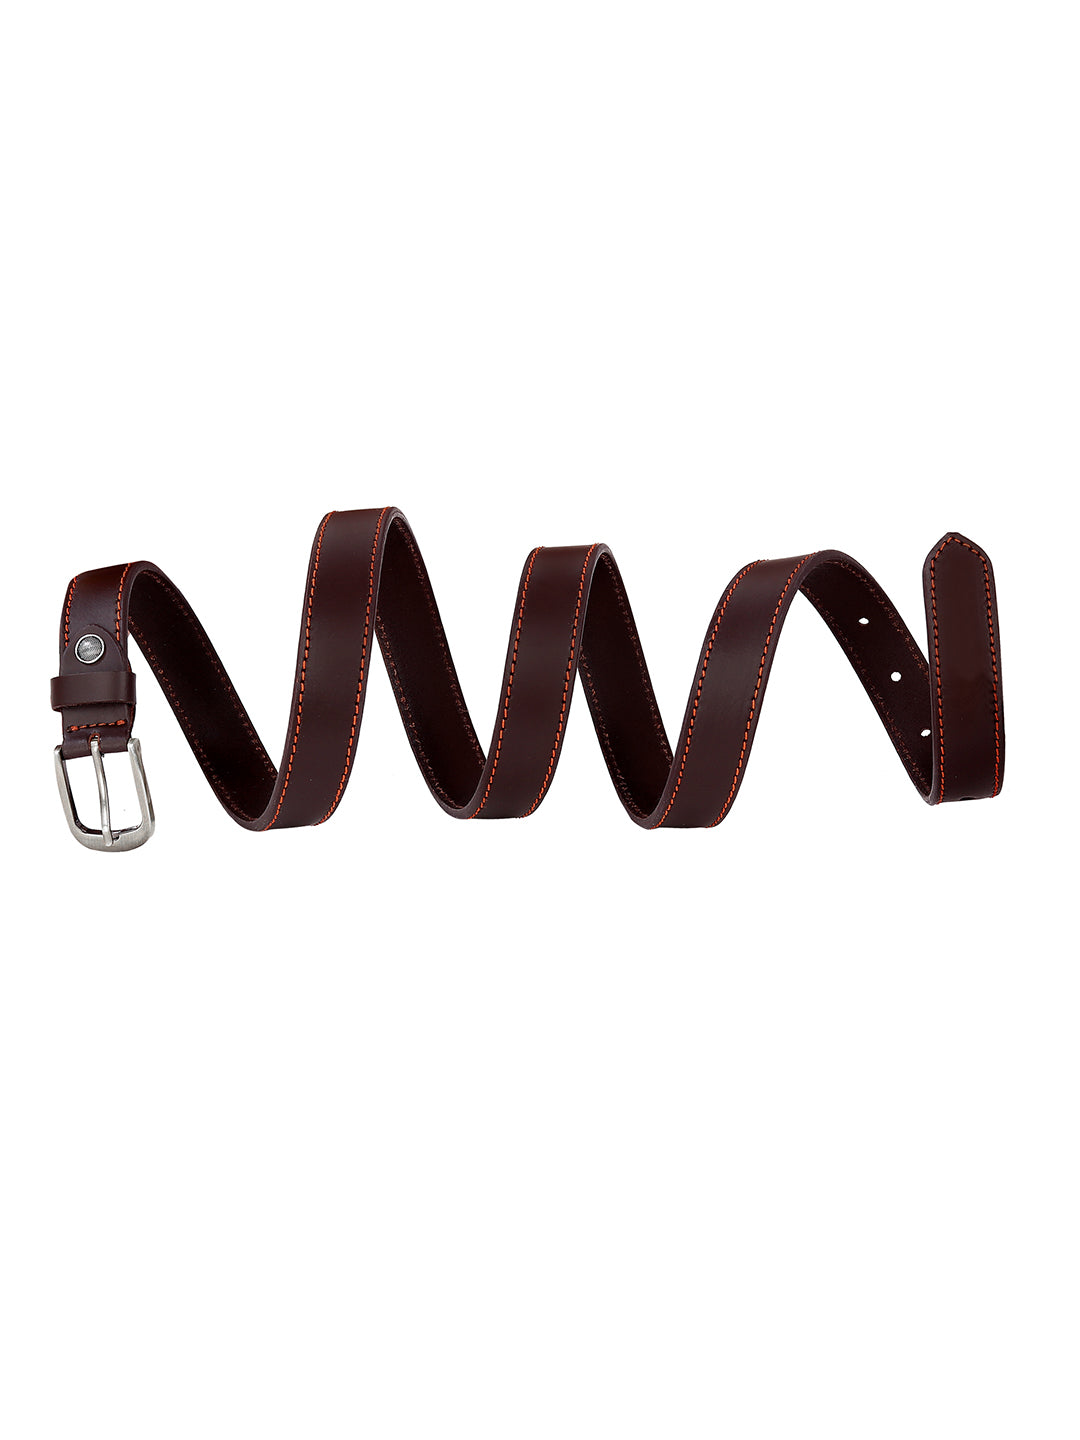 Leather World Formal Casual Brown Branded Stylish Genuine Leather Belts for Women